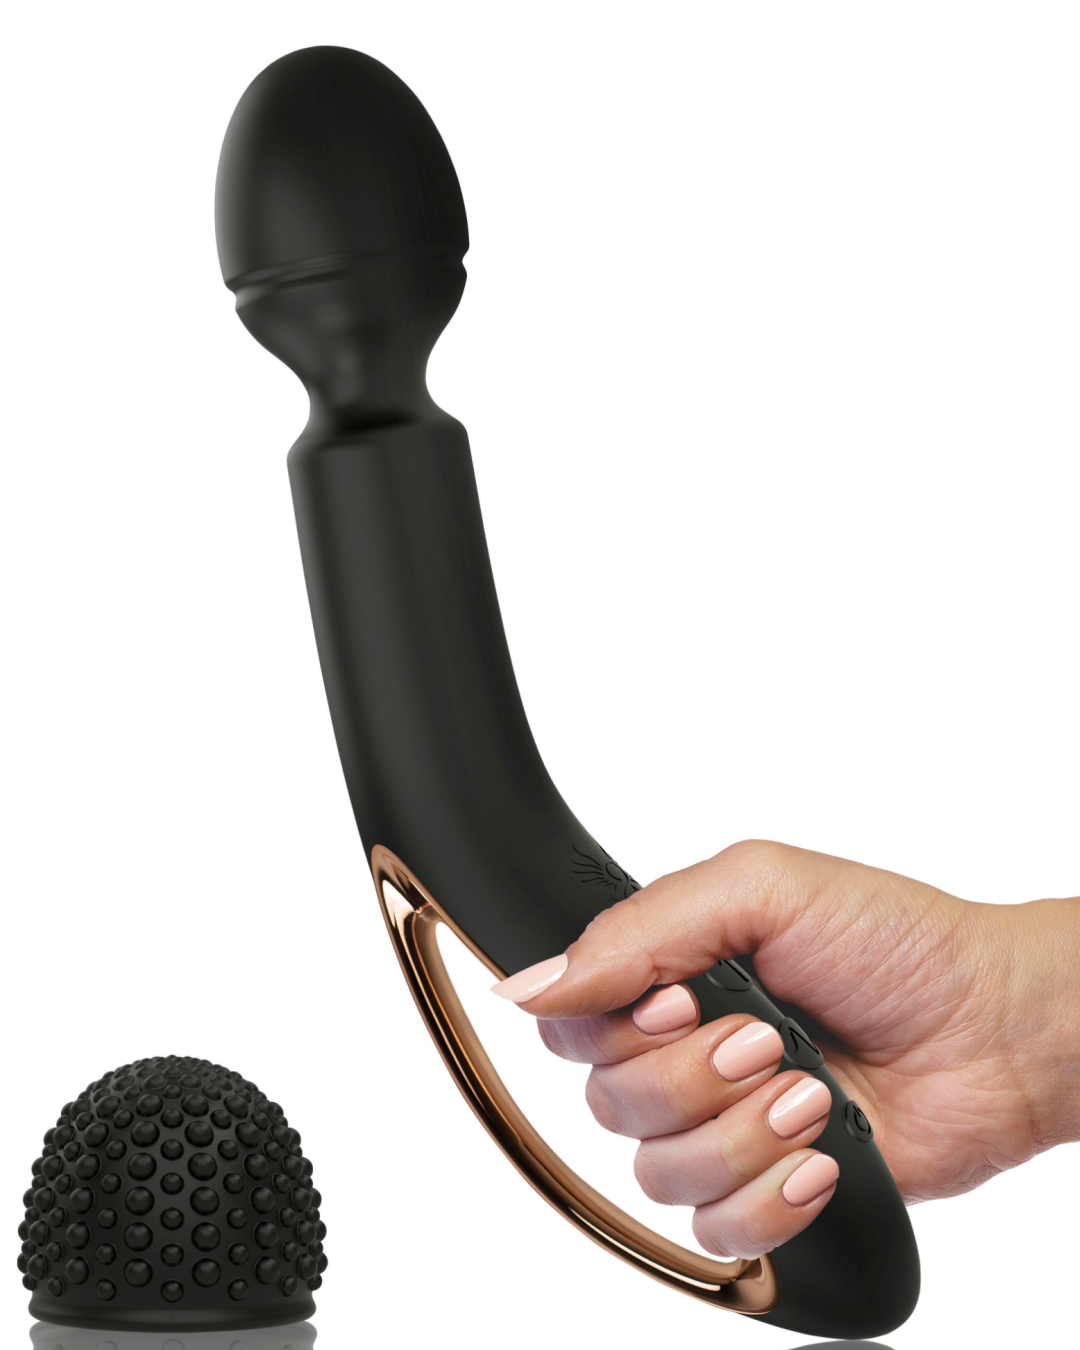 Copy of O Wand II Cordless Vibrator - Black  held in model's hand with attachment next to it 